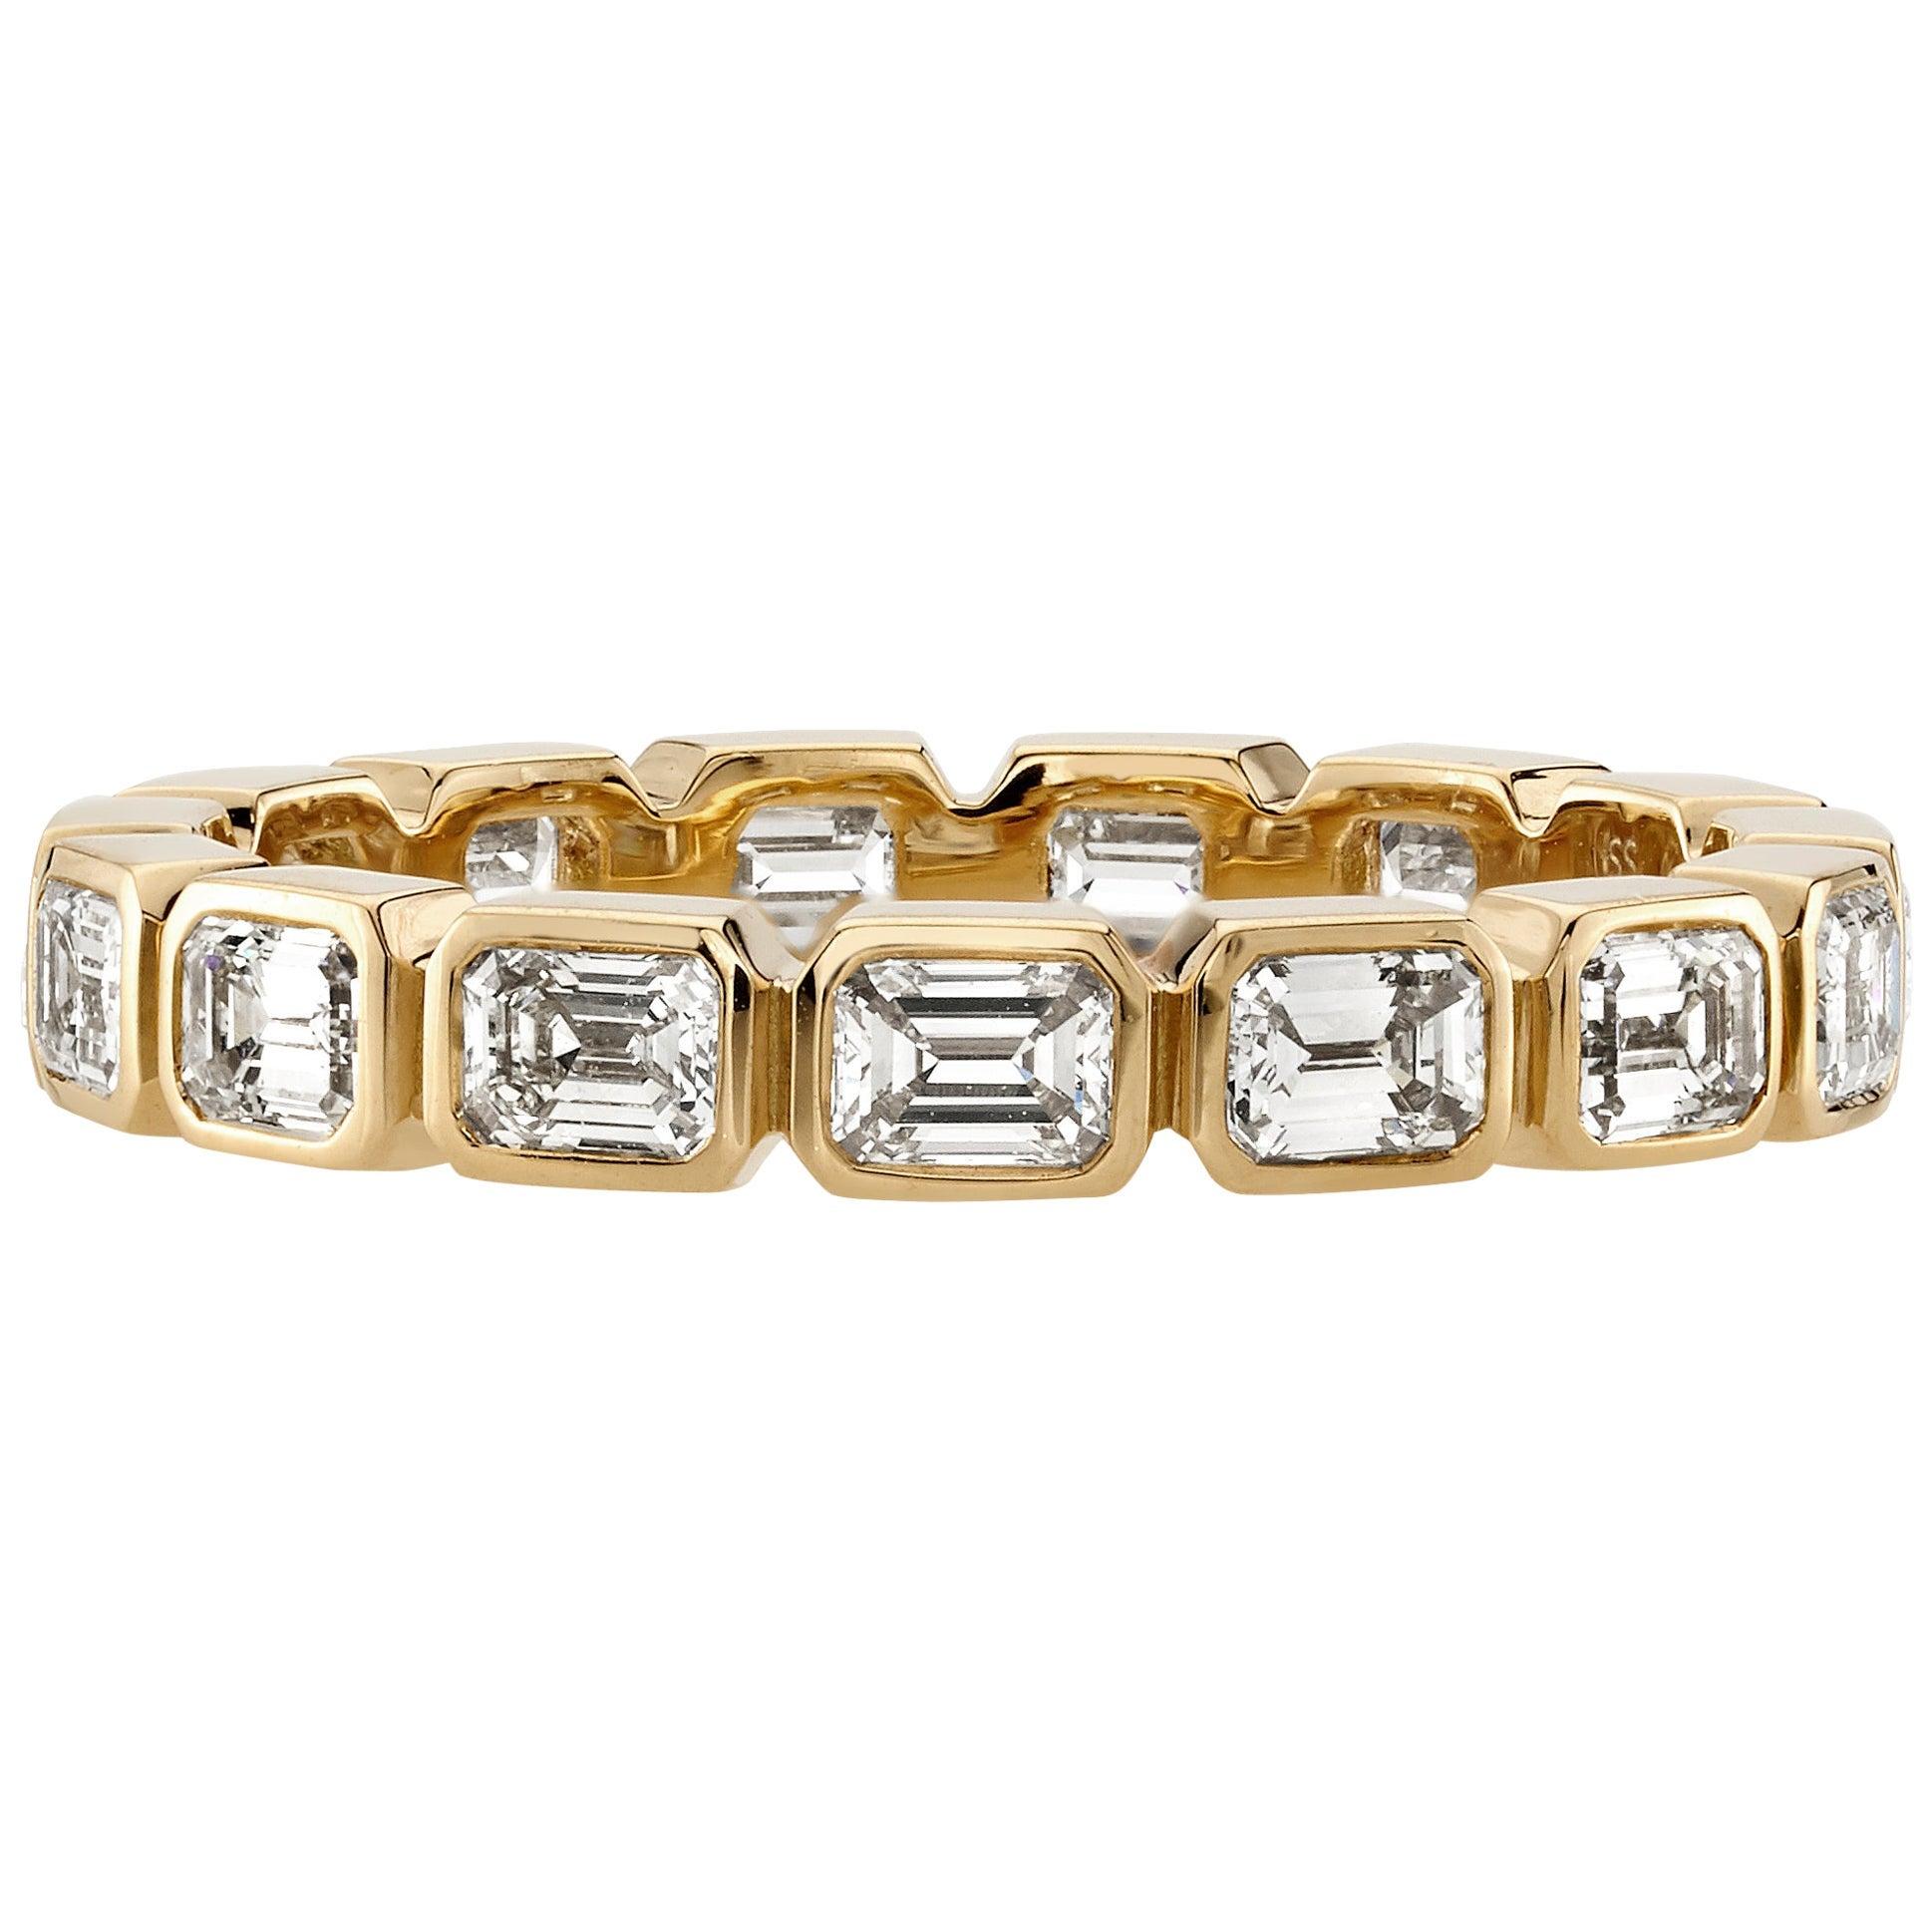 For Sale:  Handcrafted Sierra Emerald Cut Diamond Eternity Band by Single Stone